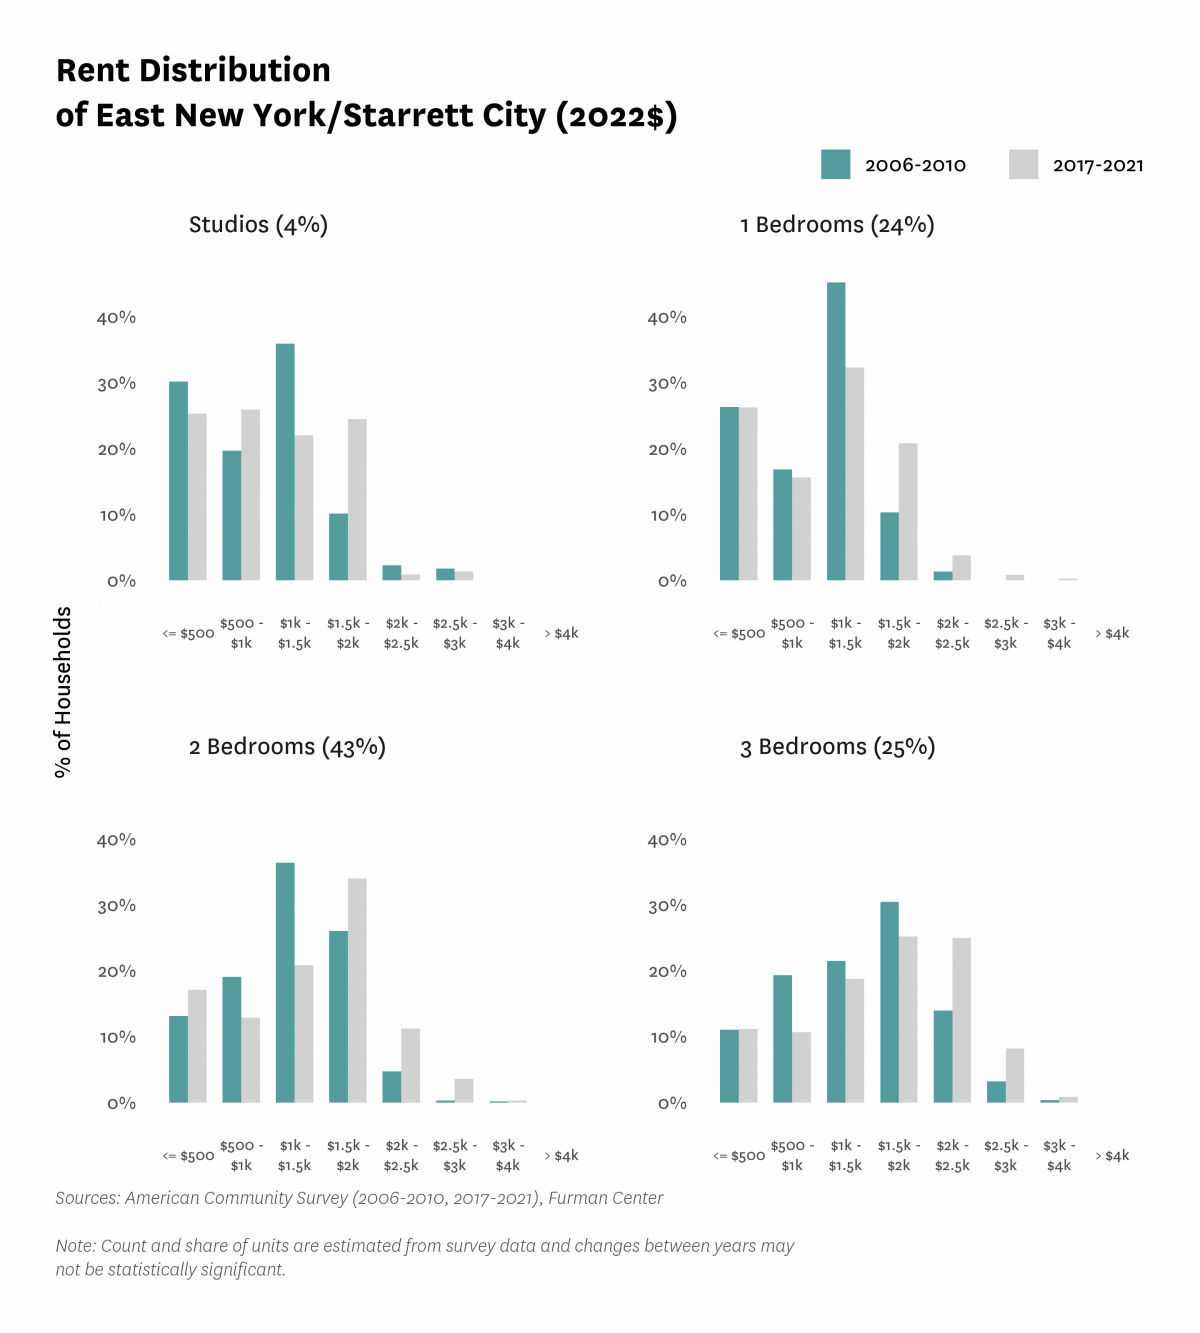 Graph showing the distribution of rents in East New York/Starrett City in both 2010 and 2017-2021.